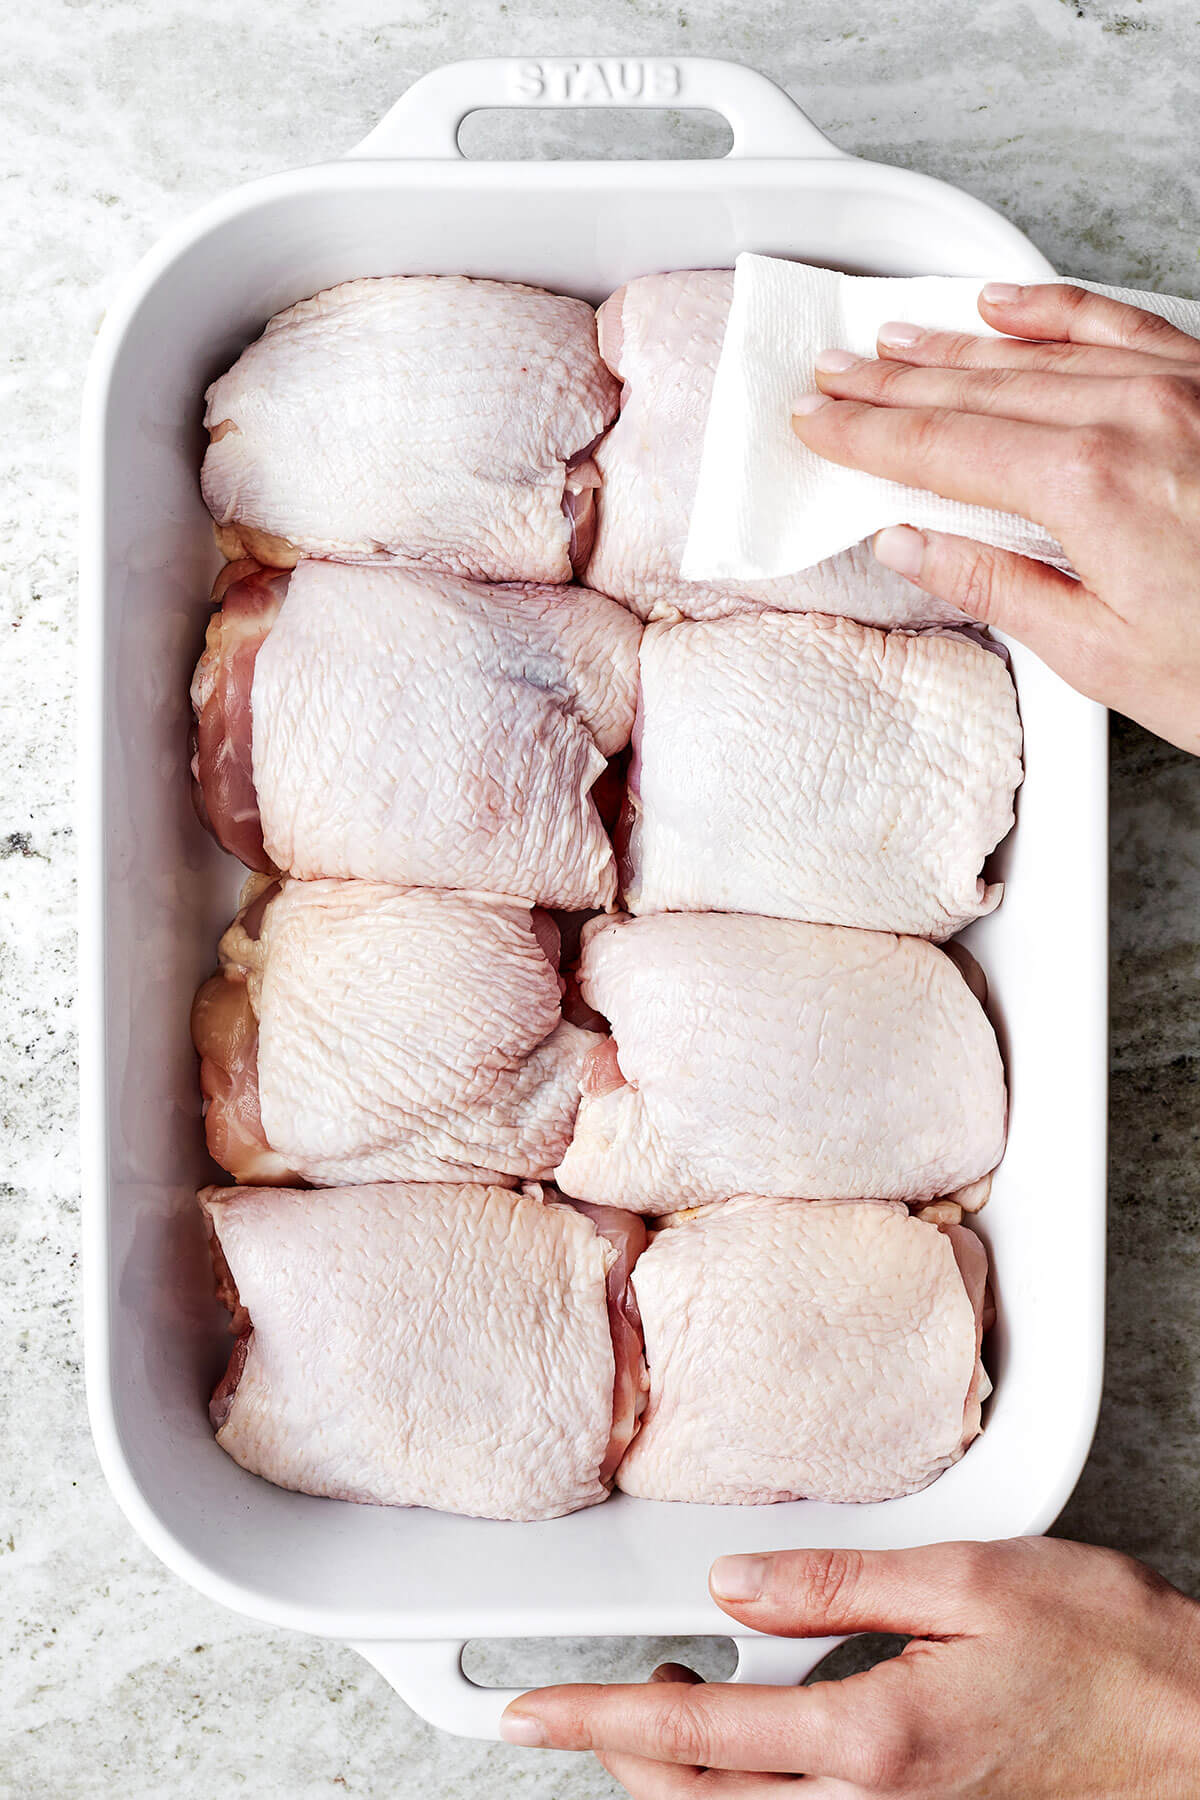 Patting chicken thighs dry before baking